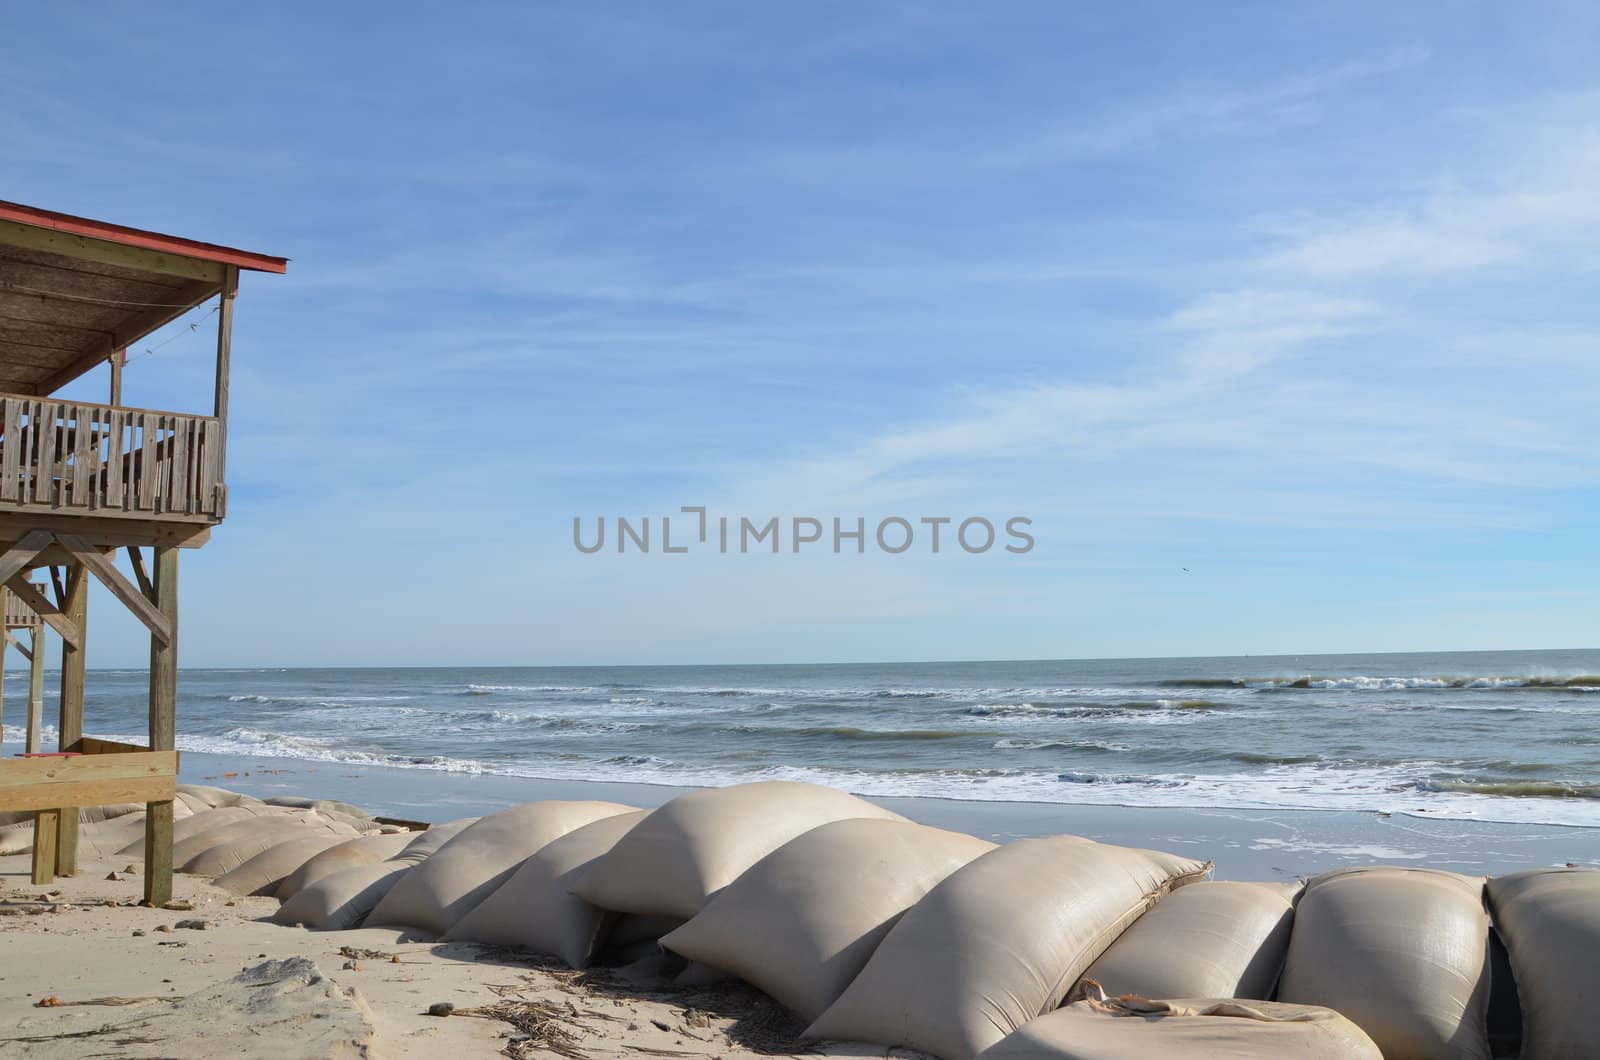 Sand bags along the beach in North Carolina to protect from heavy surf and erosion.